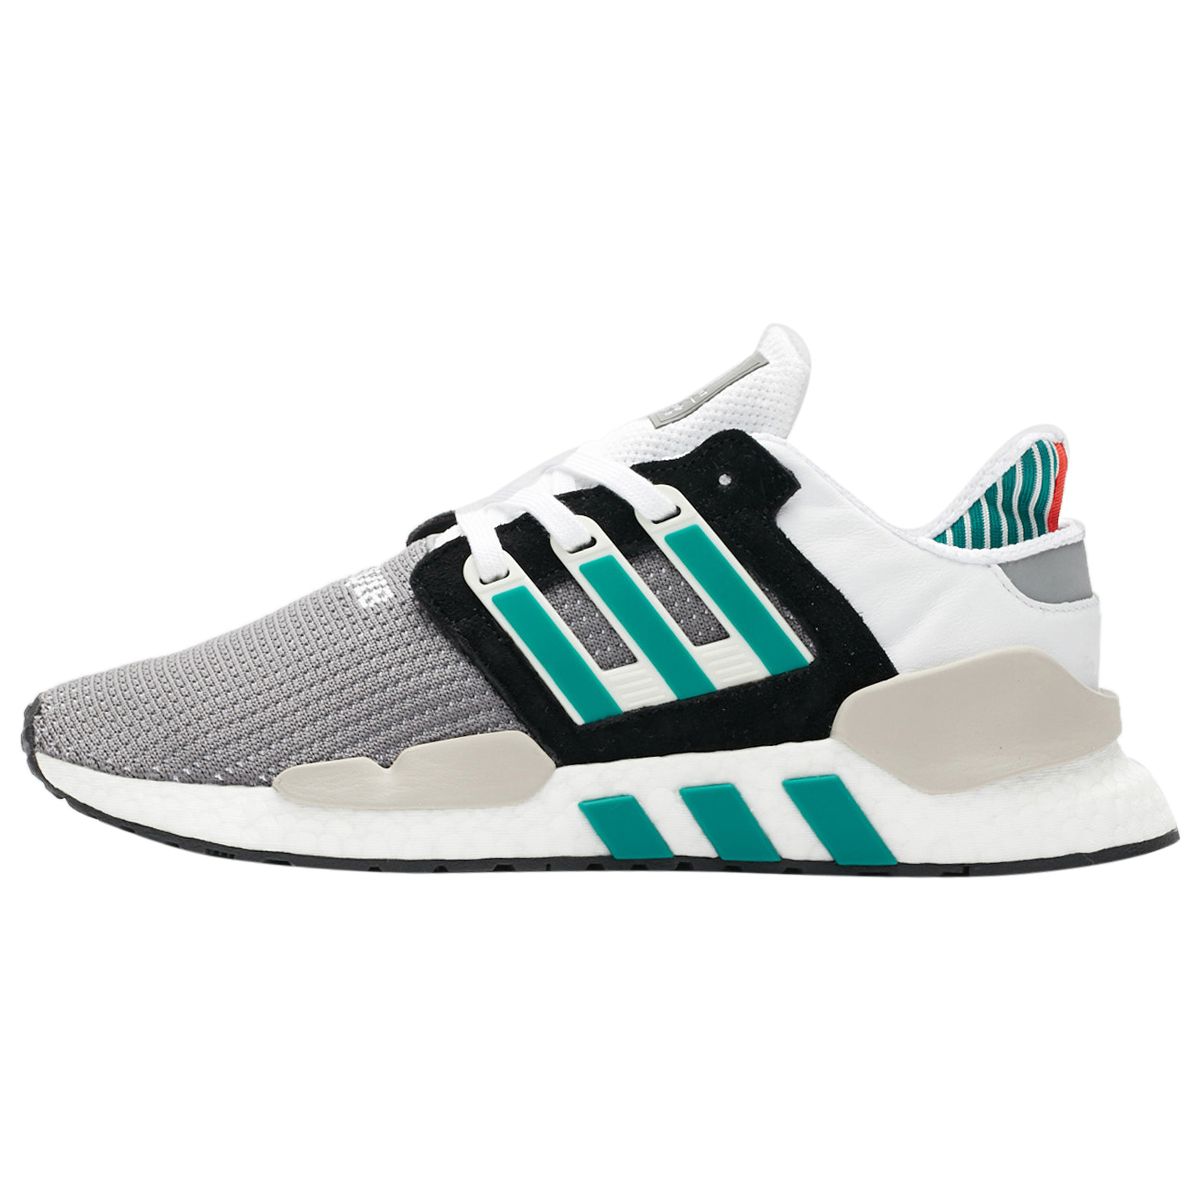 Adidas Eqt Support 91/18 Mens Style 